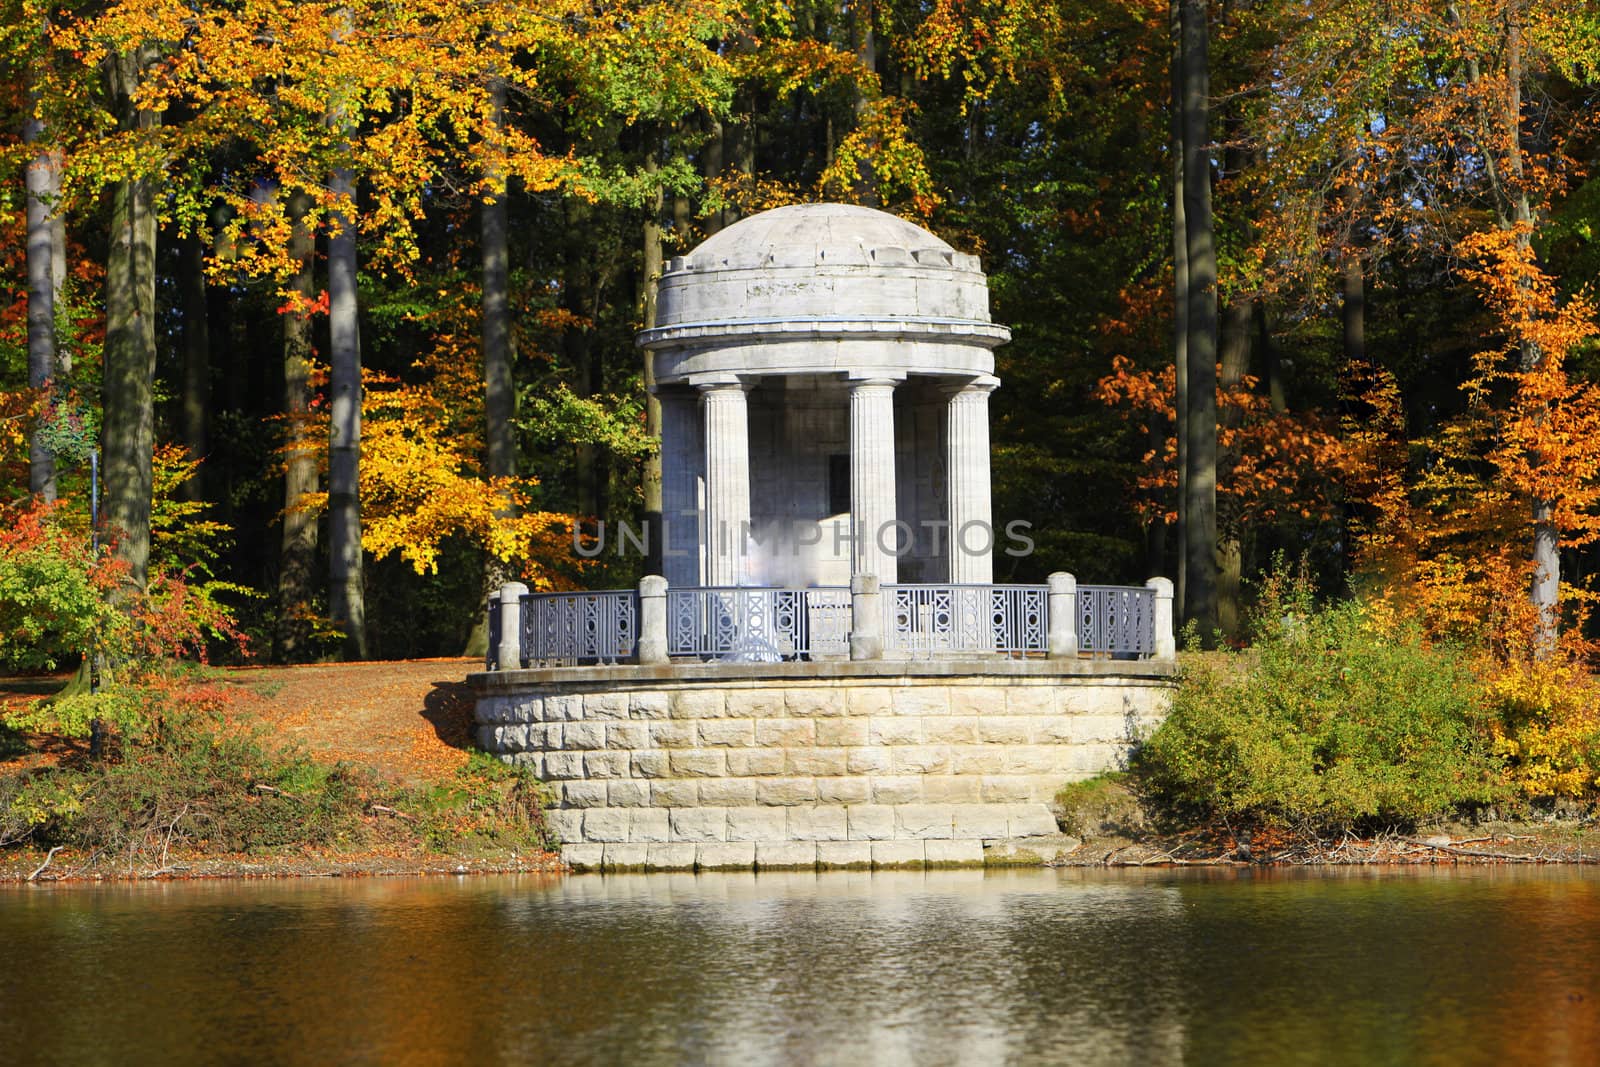 Ornamental gazebo on the waters edge at a lake surrounded by autumn or fall foliage